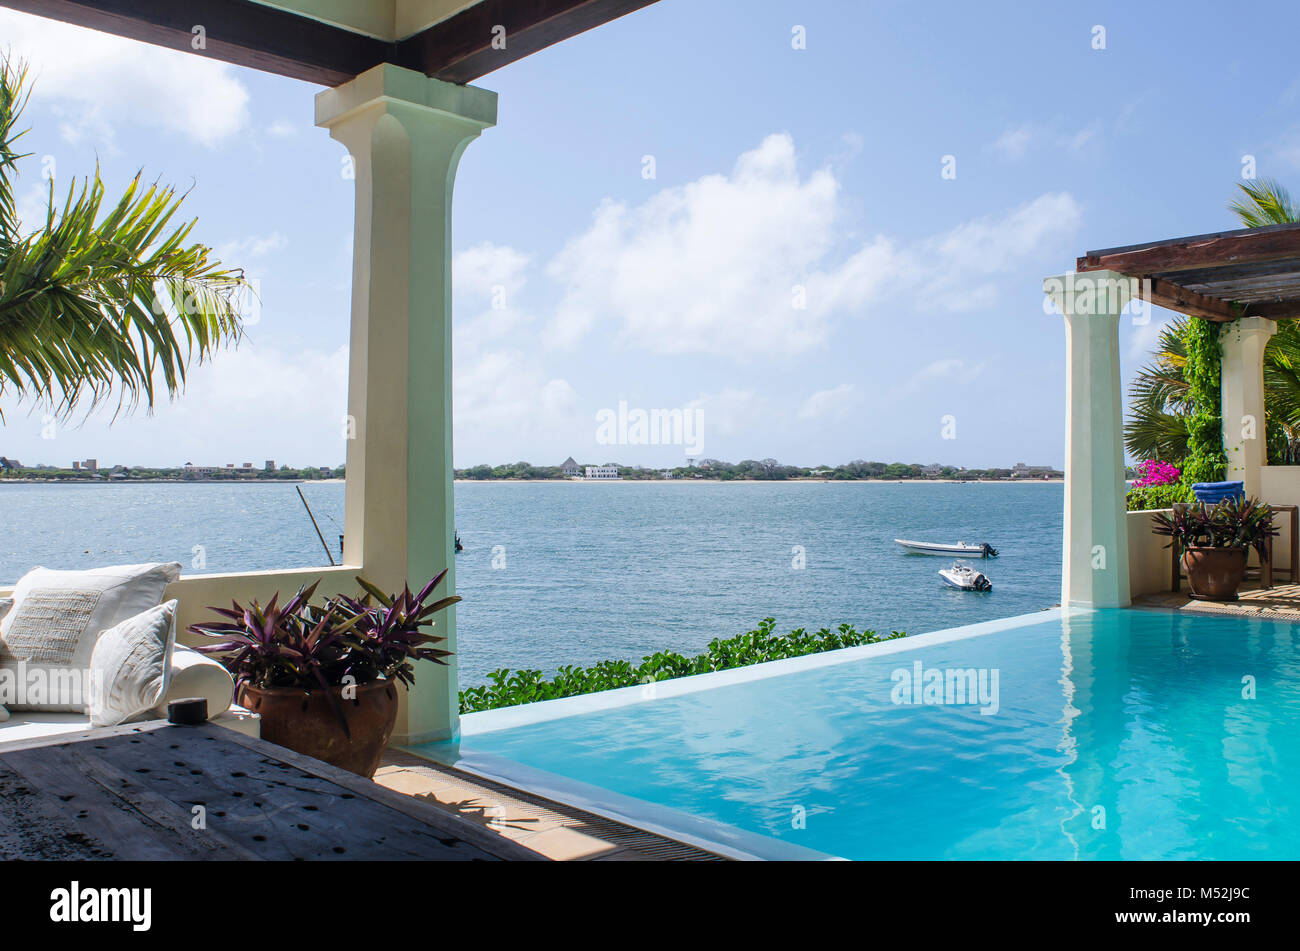 'Beach House' is the holiday home of Princess caroline of Monaco. located on the small island of Shela, adjoining Lamu Island in the greater Lamu Arch Stock Photo